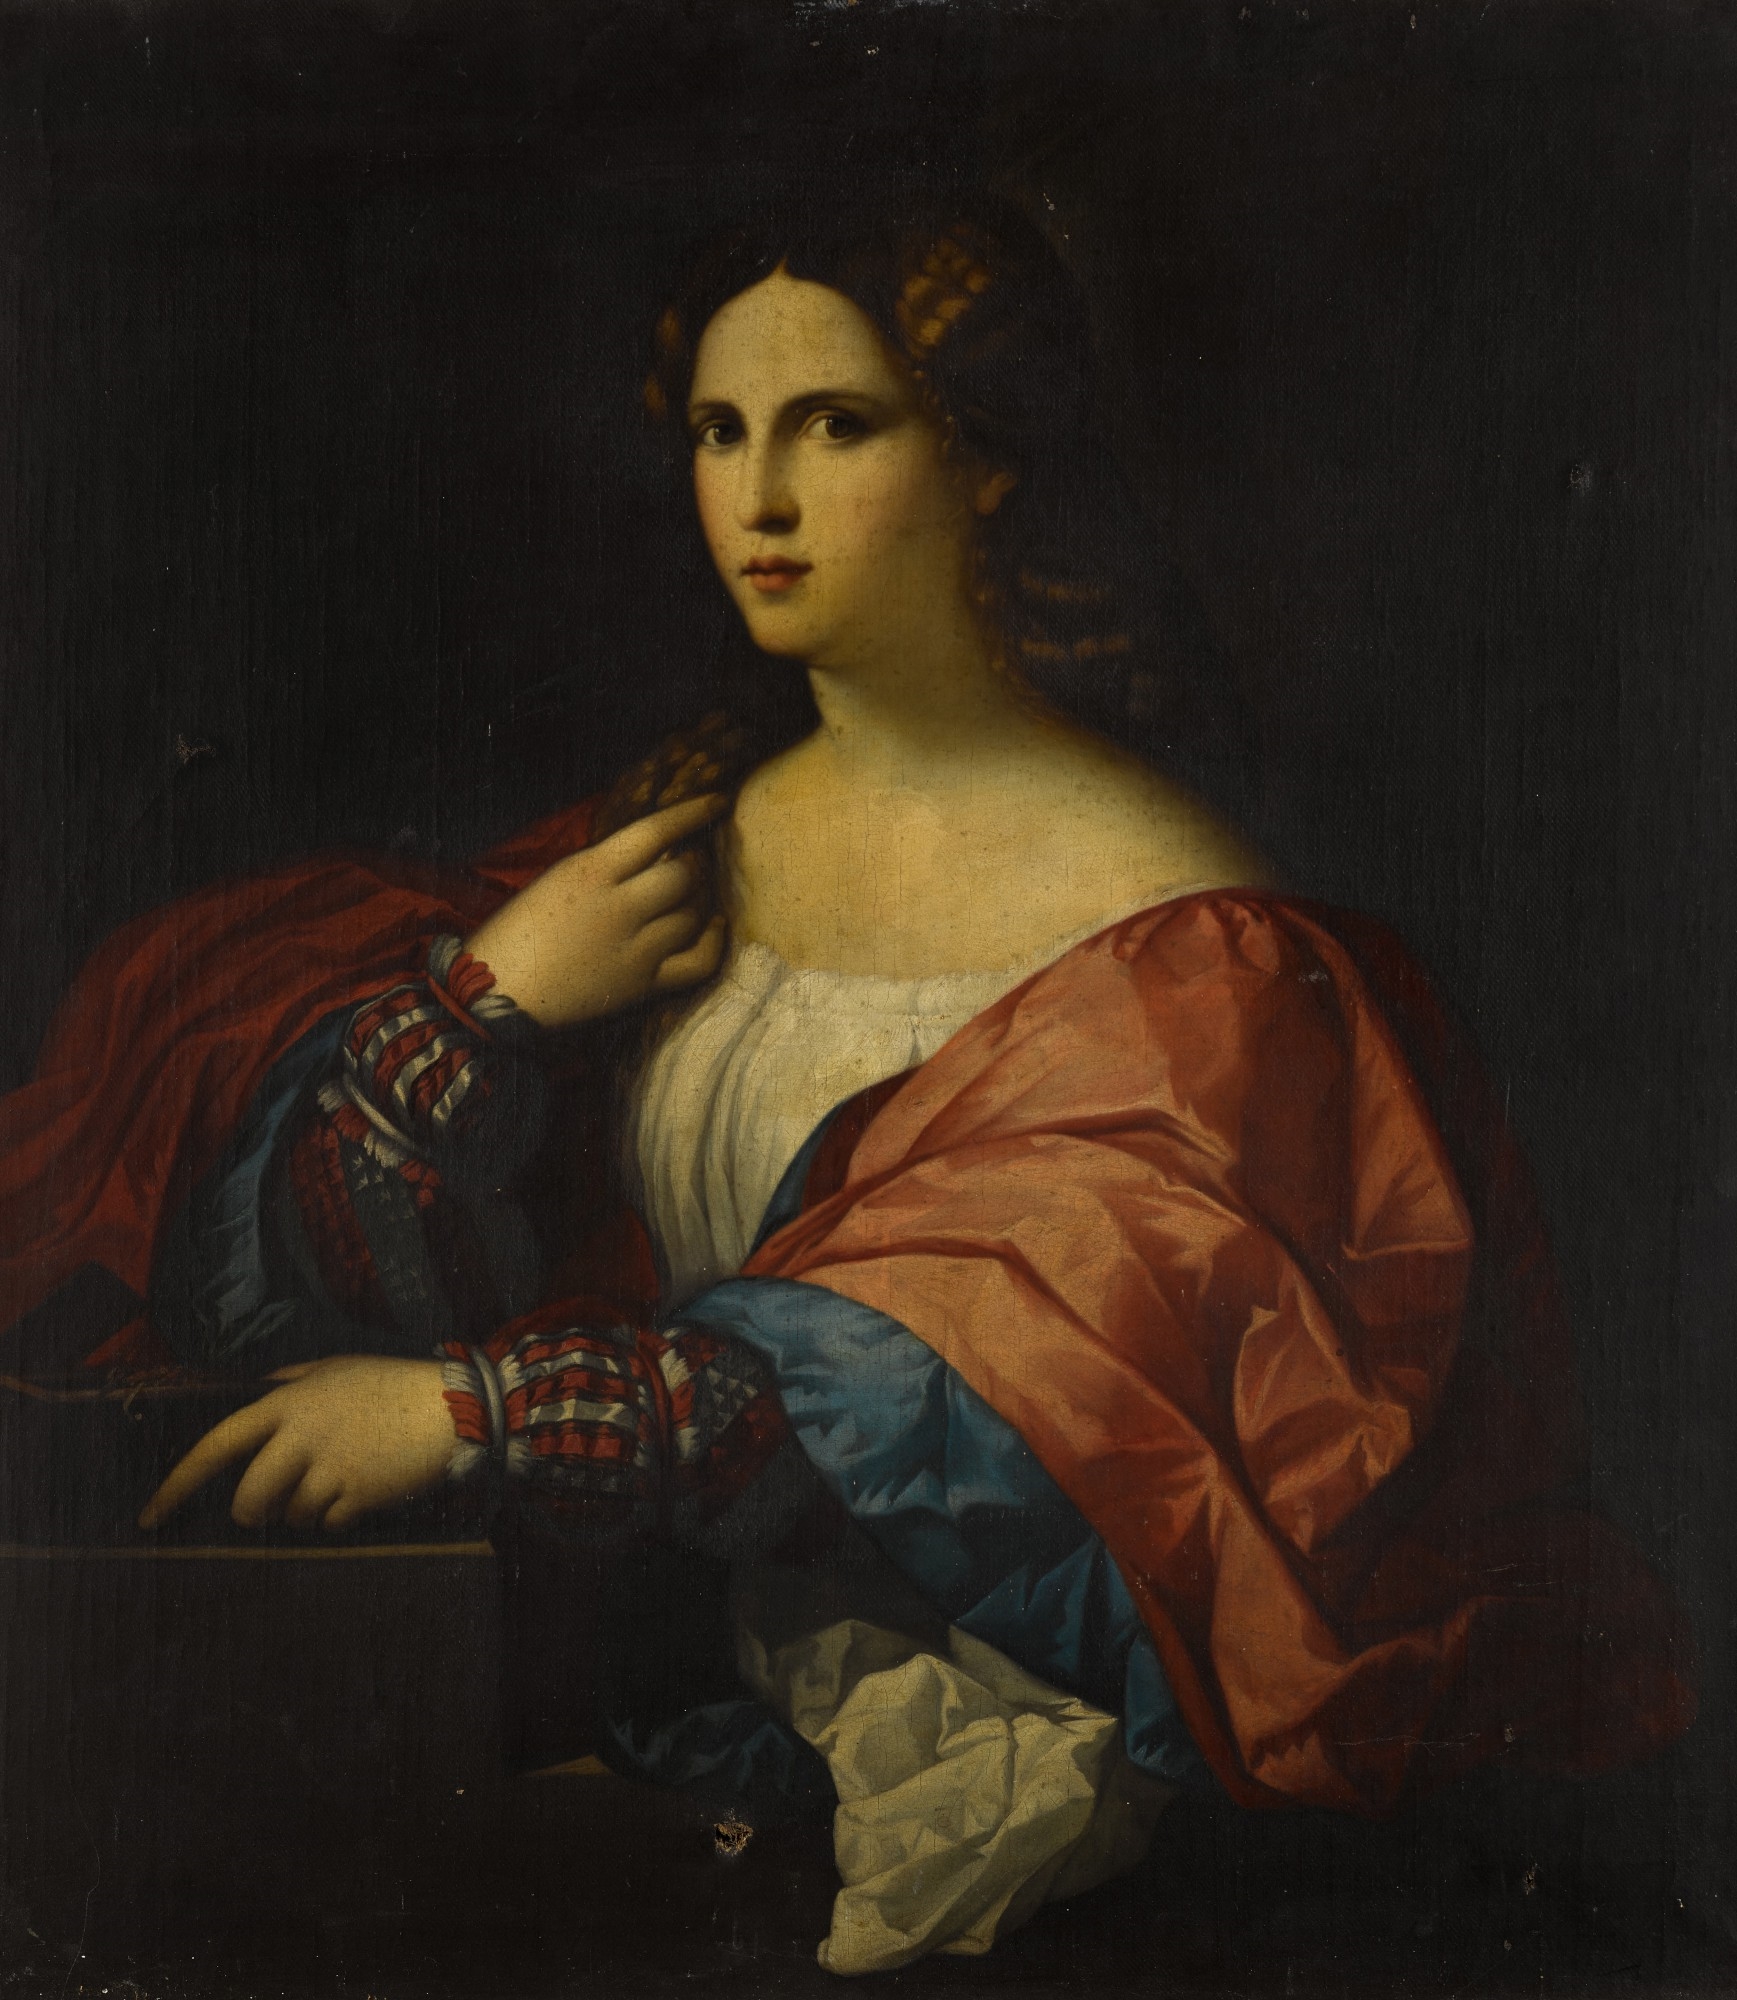 Artwork by Jacopo Palma il Vecchio, Portrait of a young woman known as 'La Bella', Made of oil on canvas